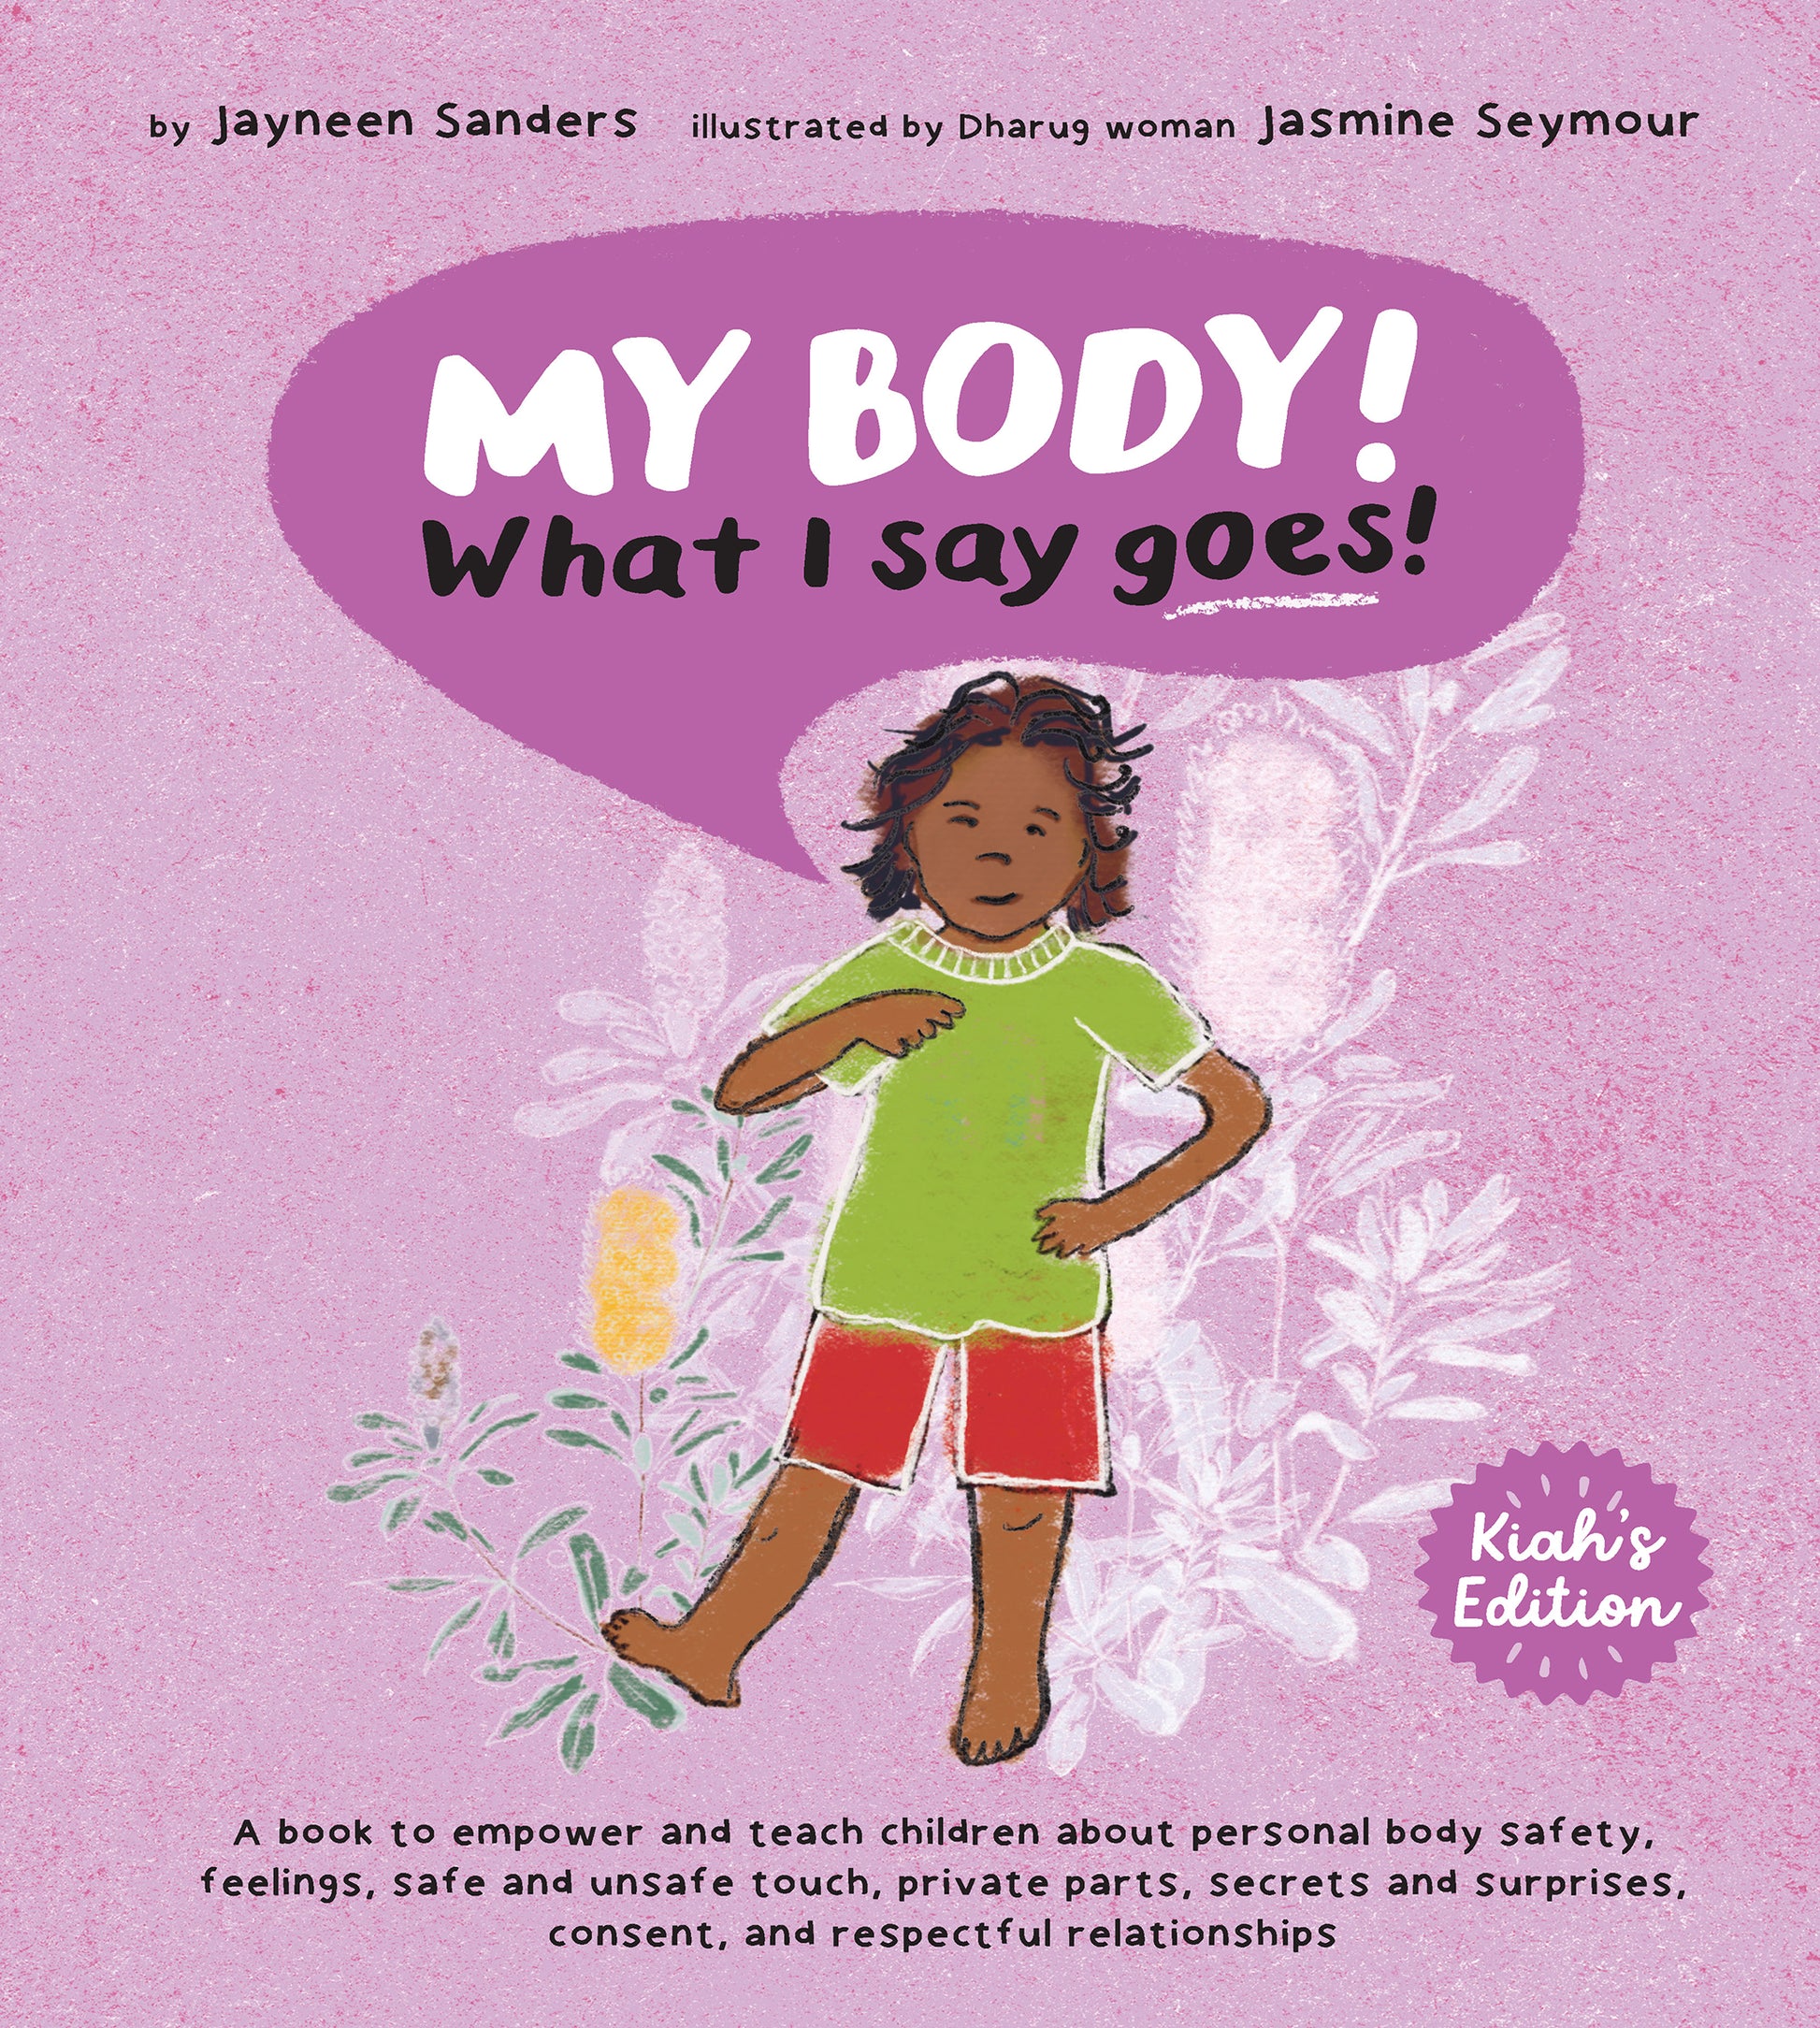 The cover of the book ‘My Body! What I Say Goes! Kiah's Edition’ by Jayneen Sanders.